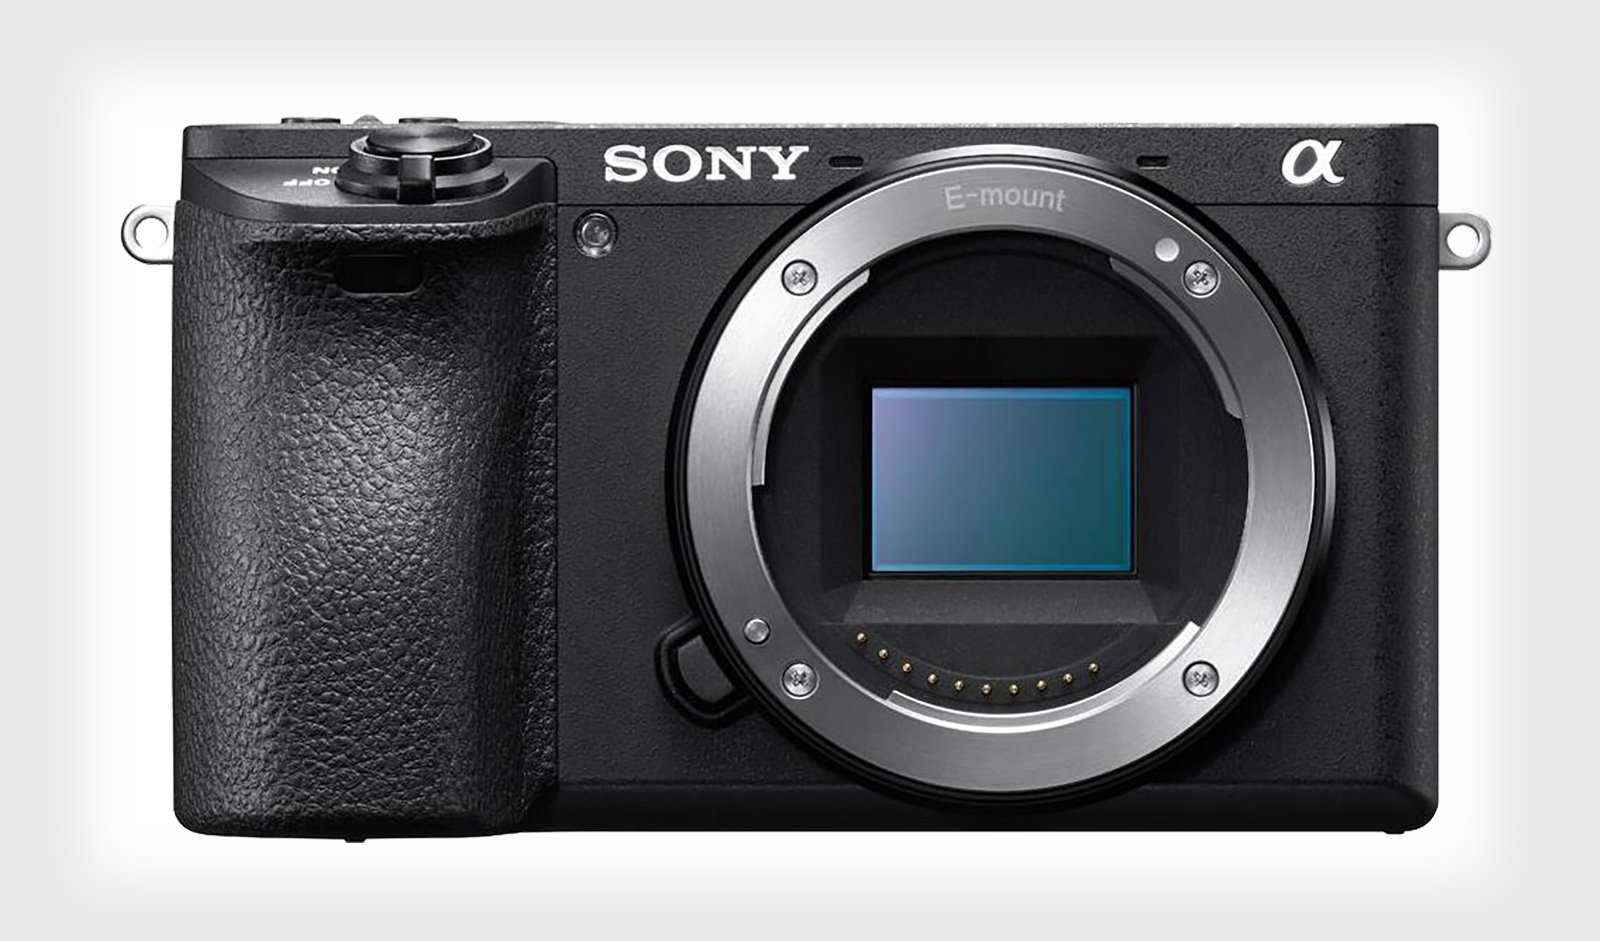  sony launch two aps-c e-mount cameras 